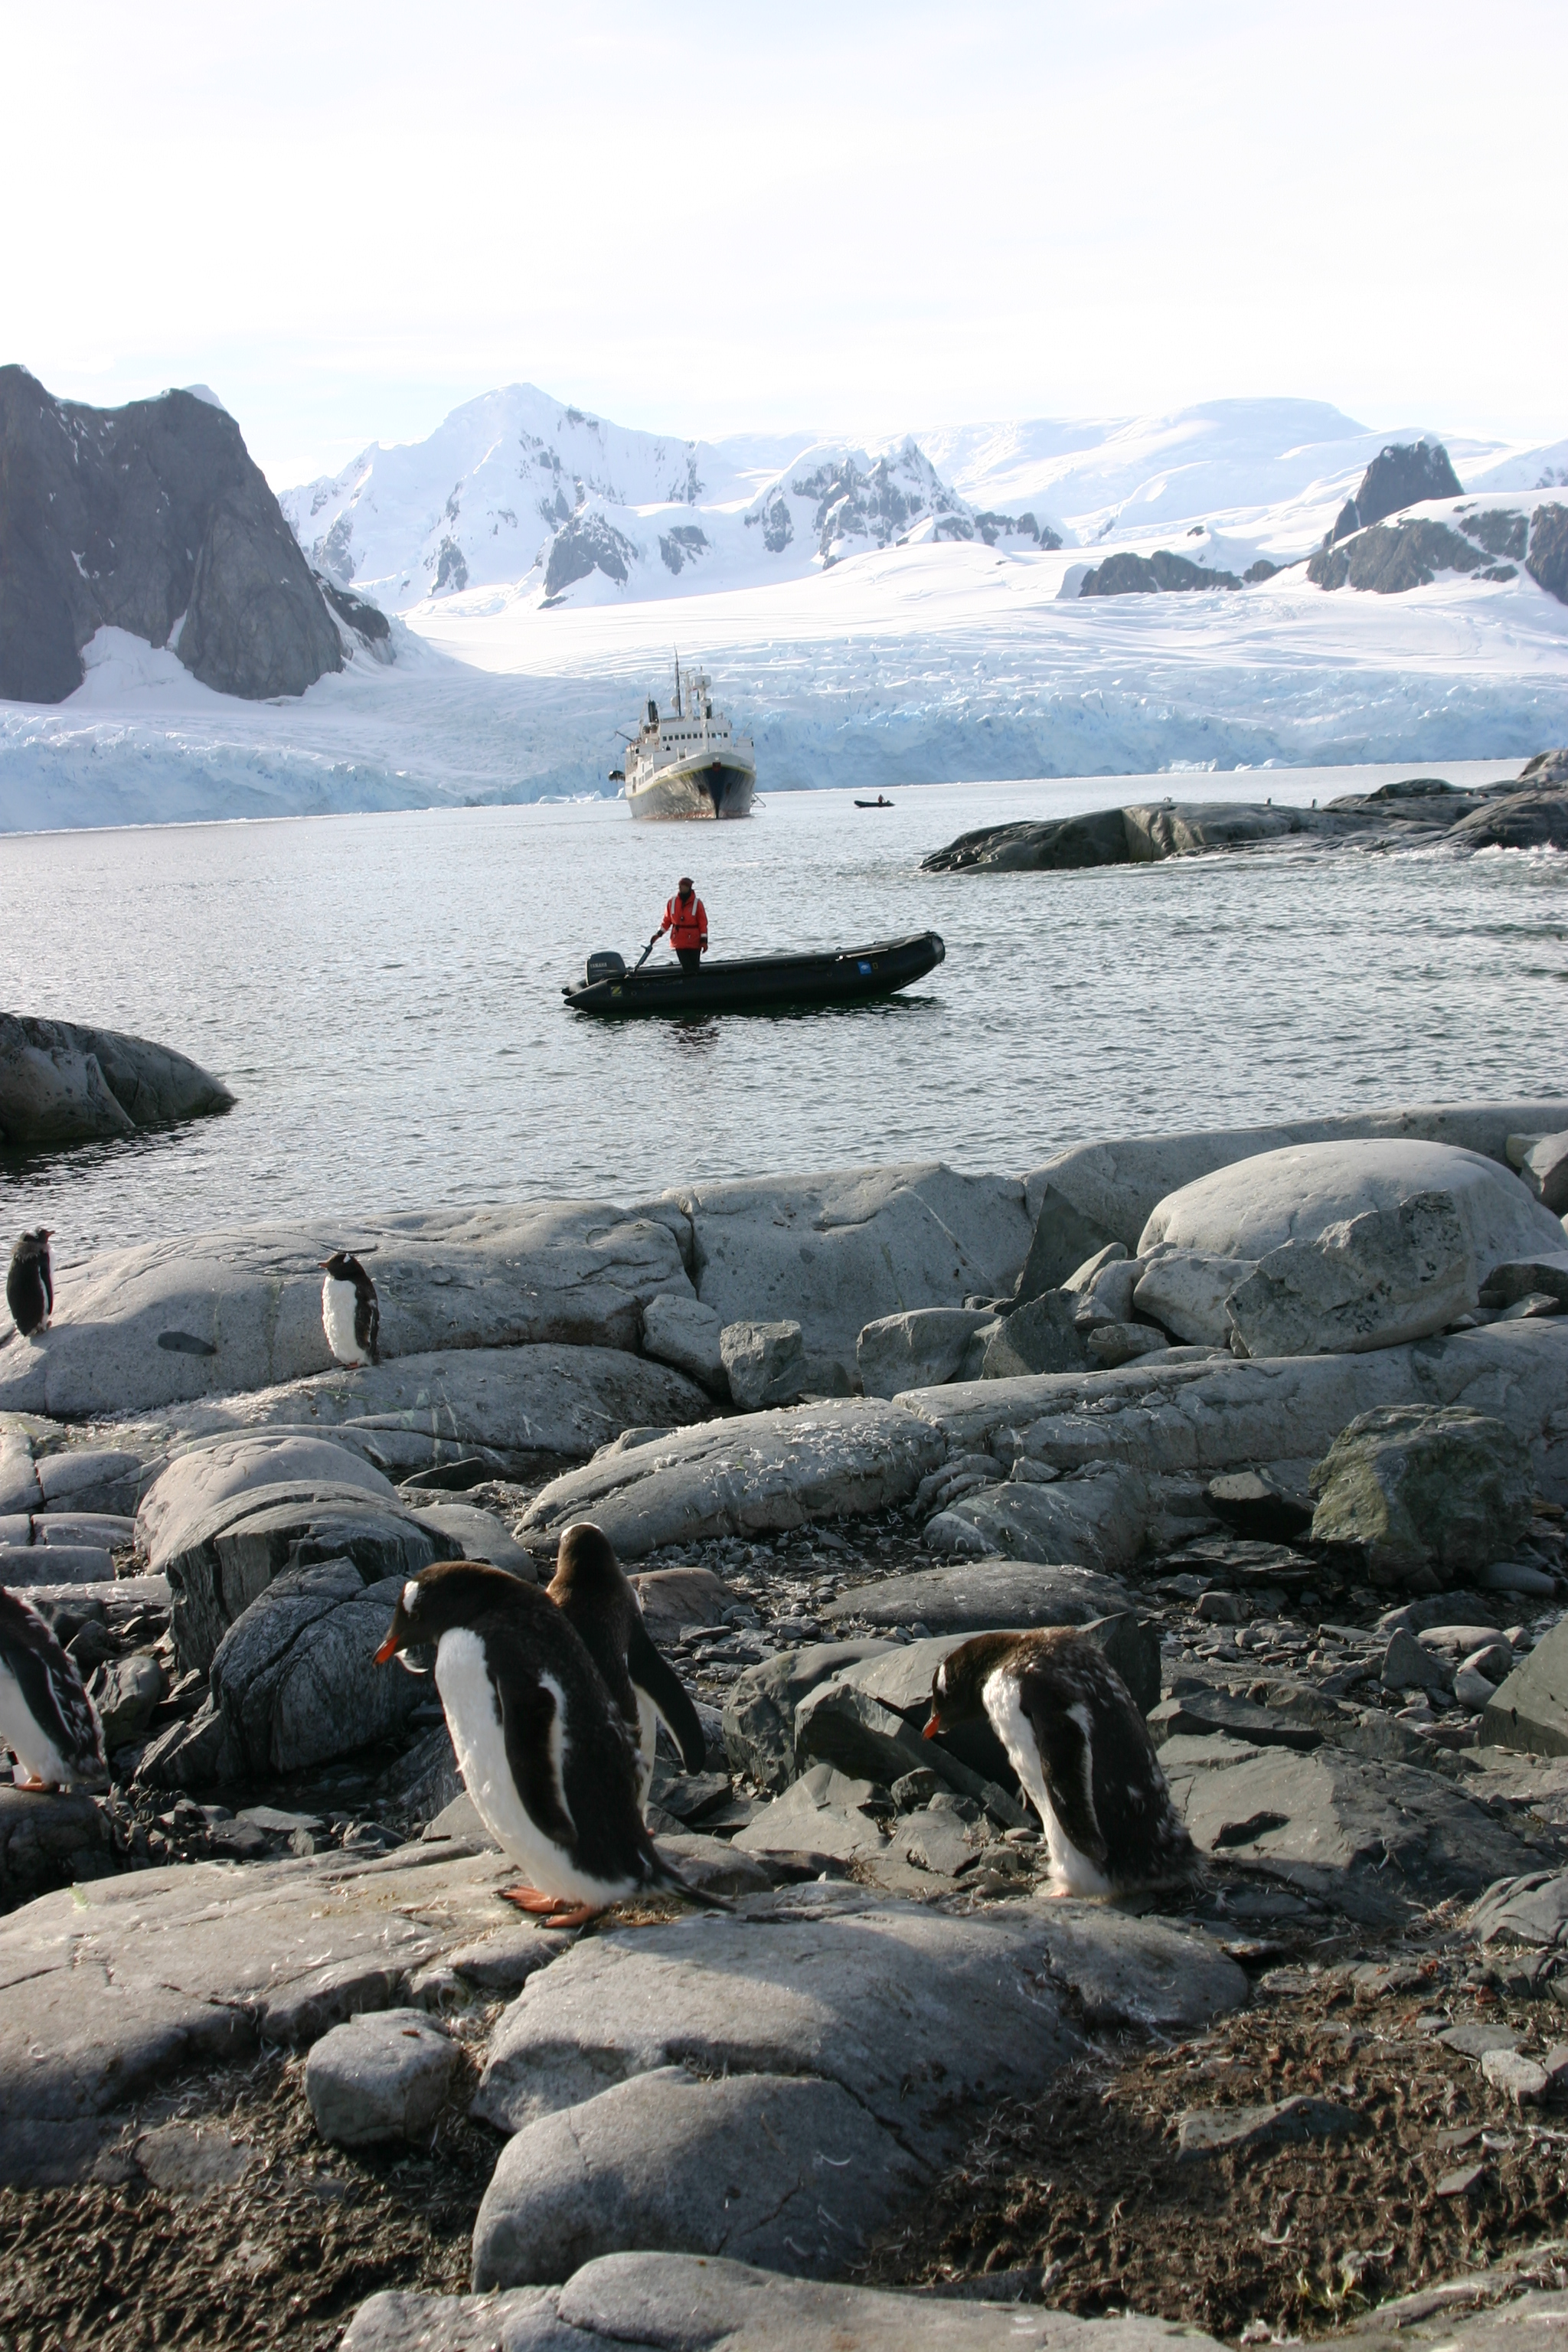 Boats, water, penguins.